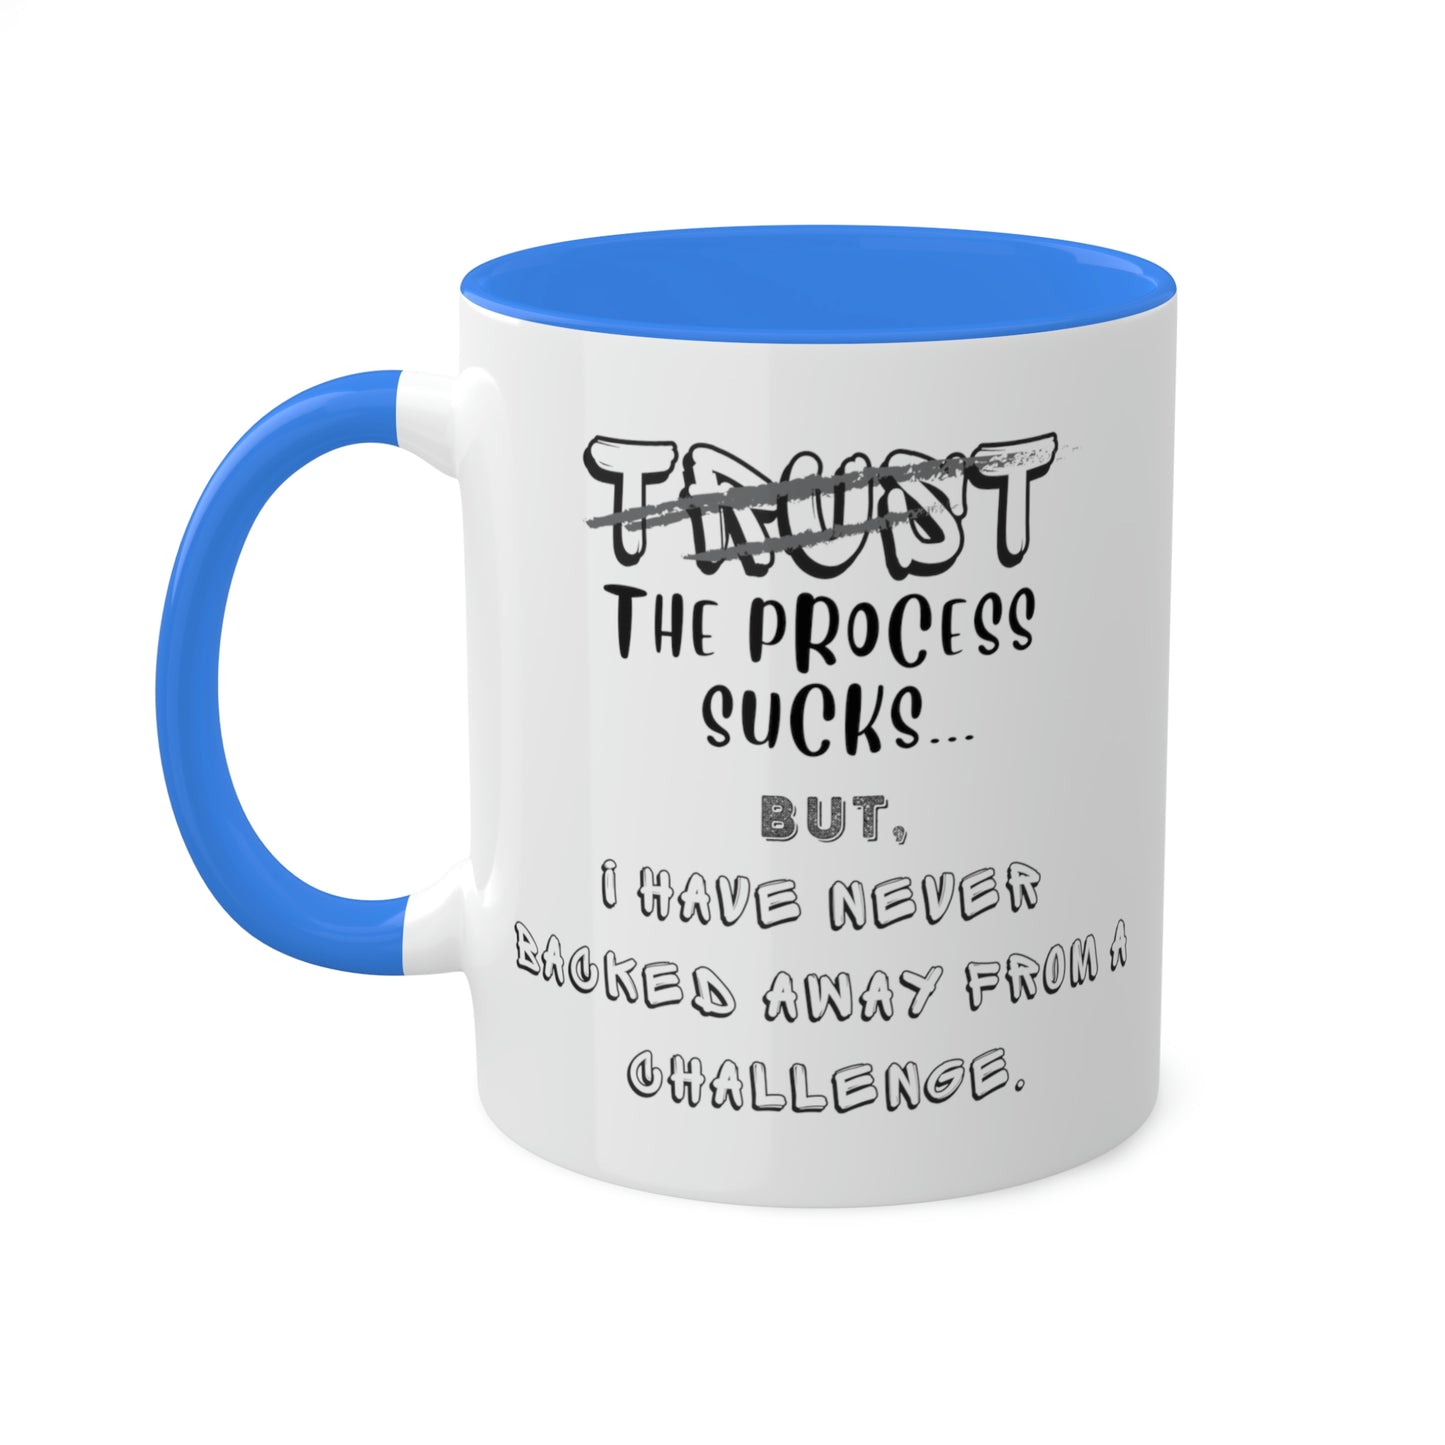 Colorful Mugs, Accent Mugs, Sassy and Funny, Inspirational, Assorted Colors, 11oz